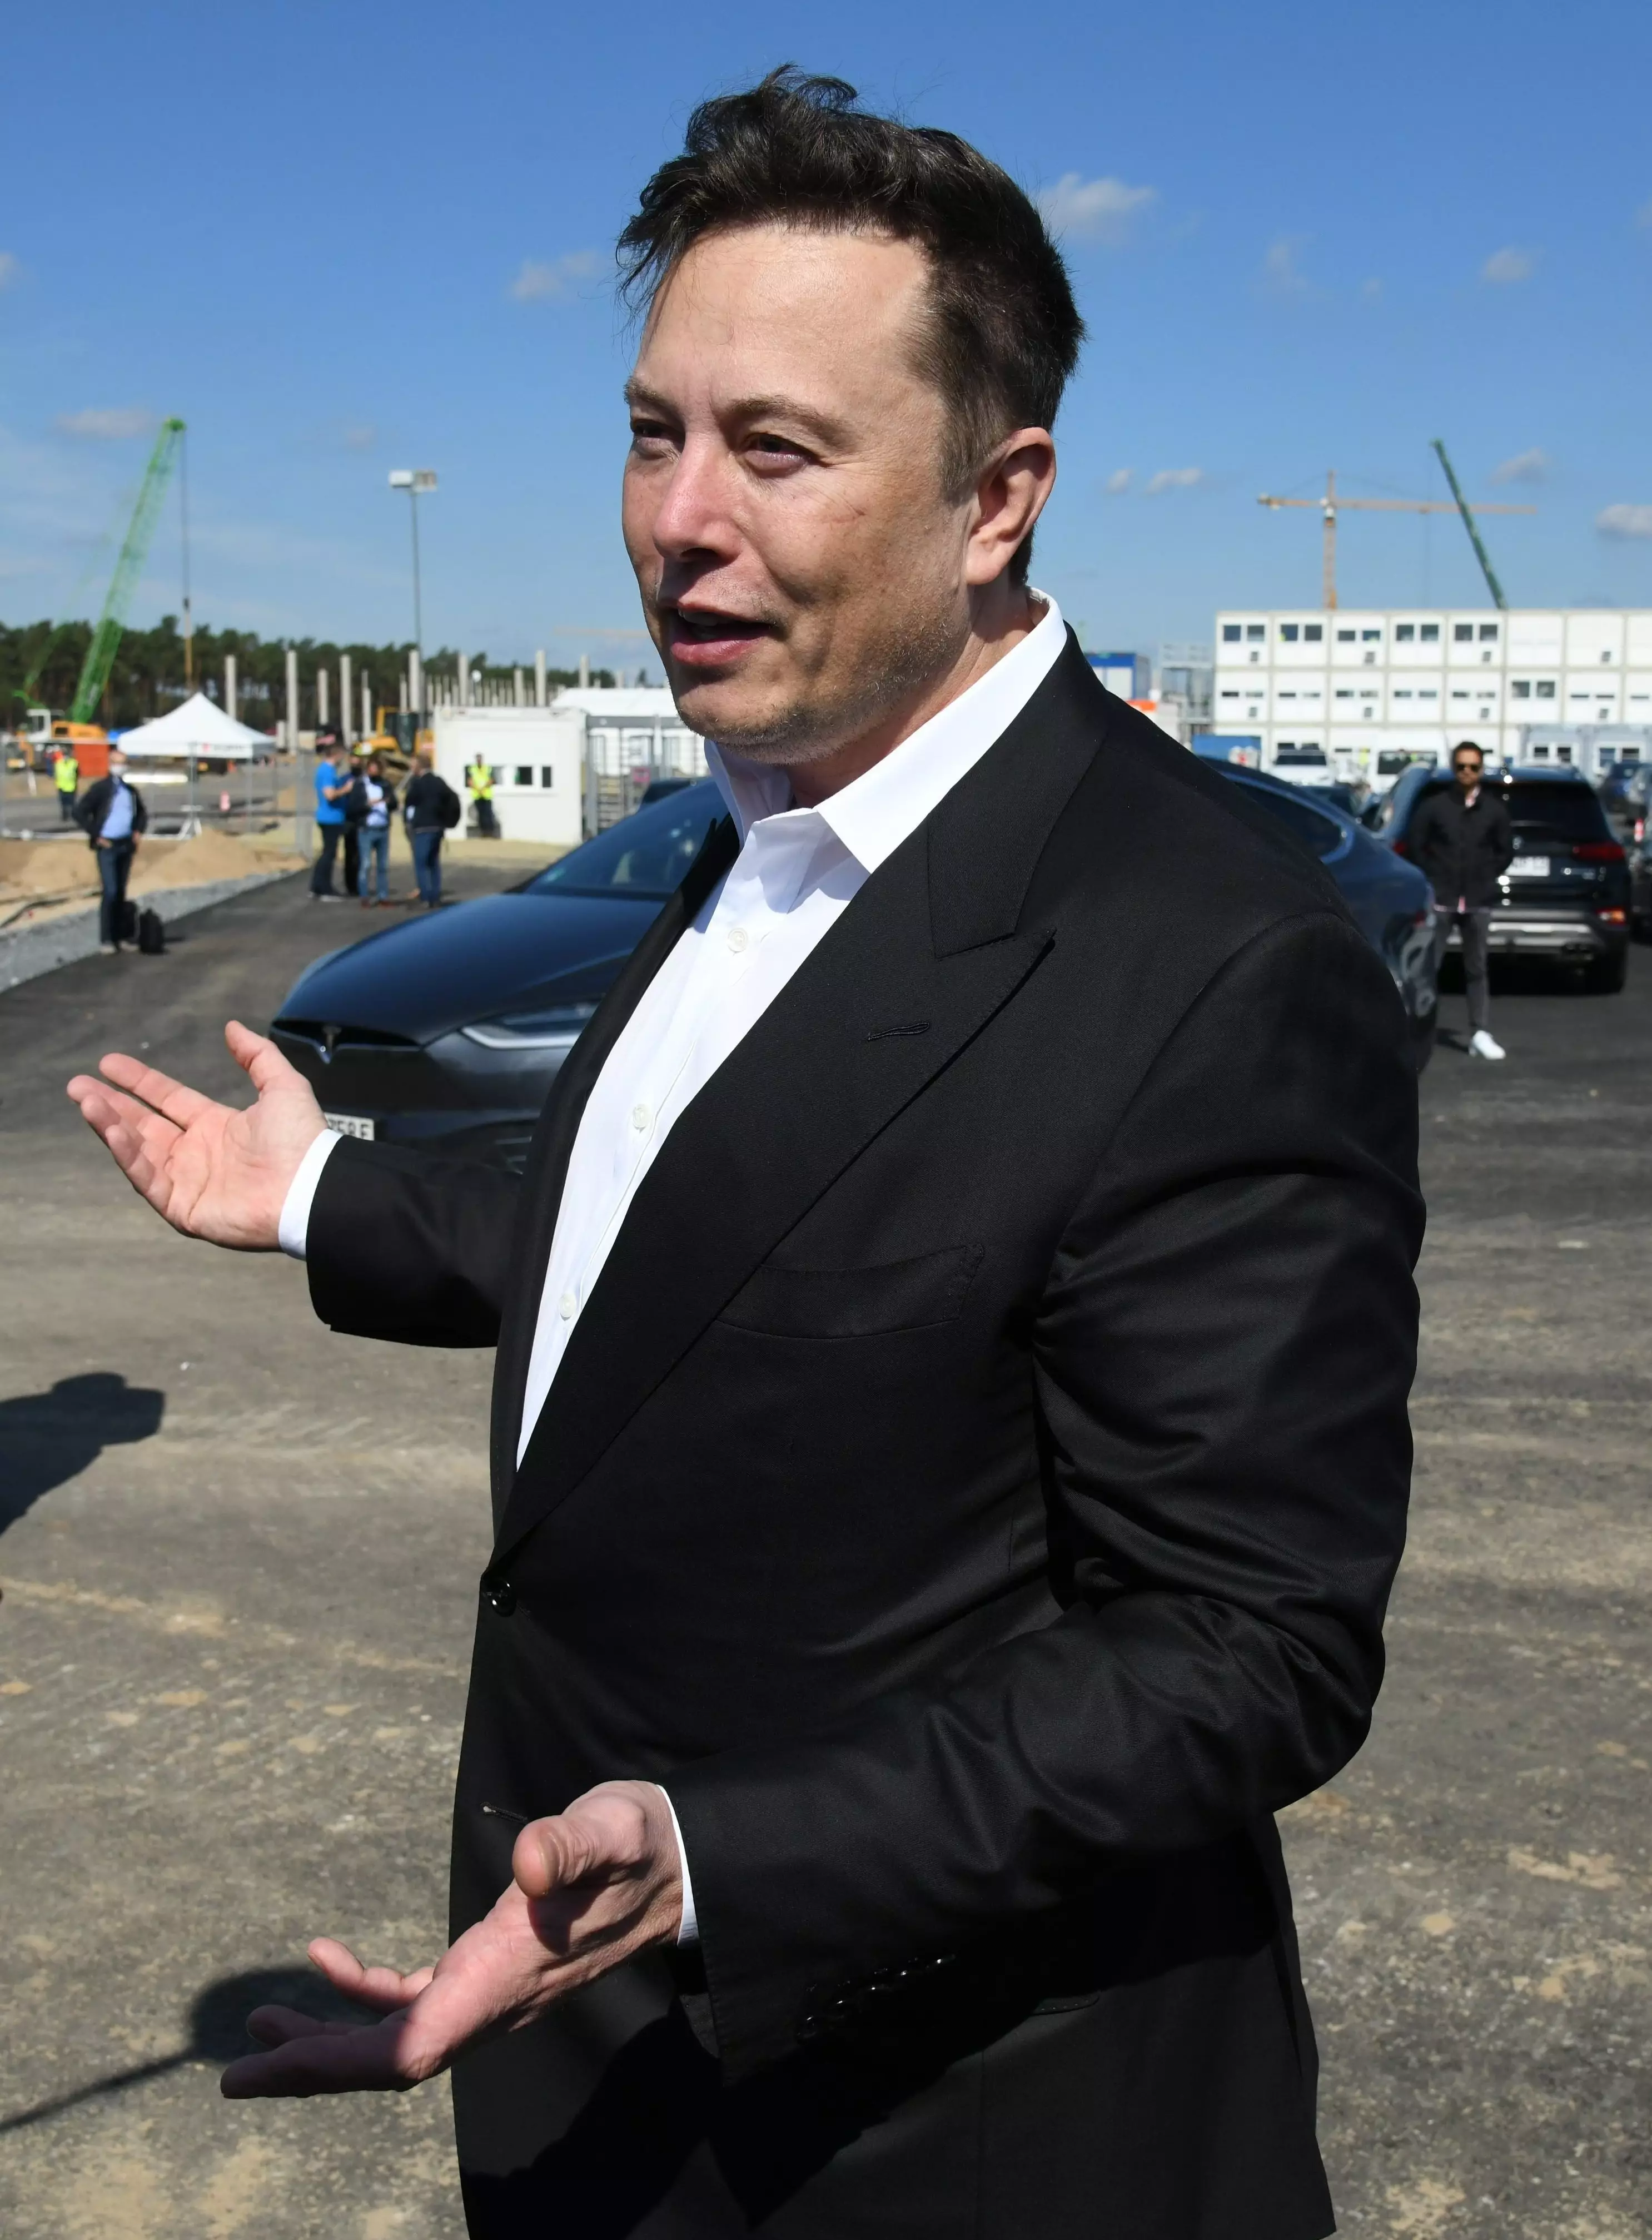 Elon Musk recently became the richest person on the planet.